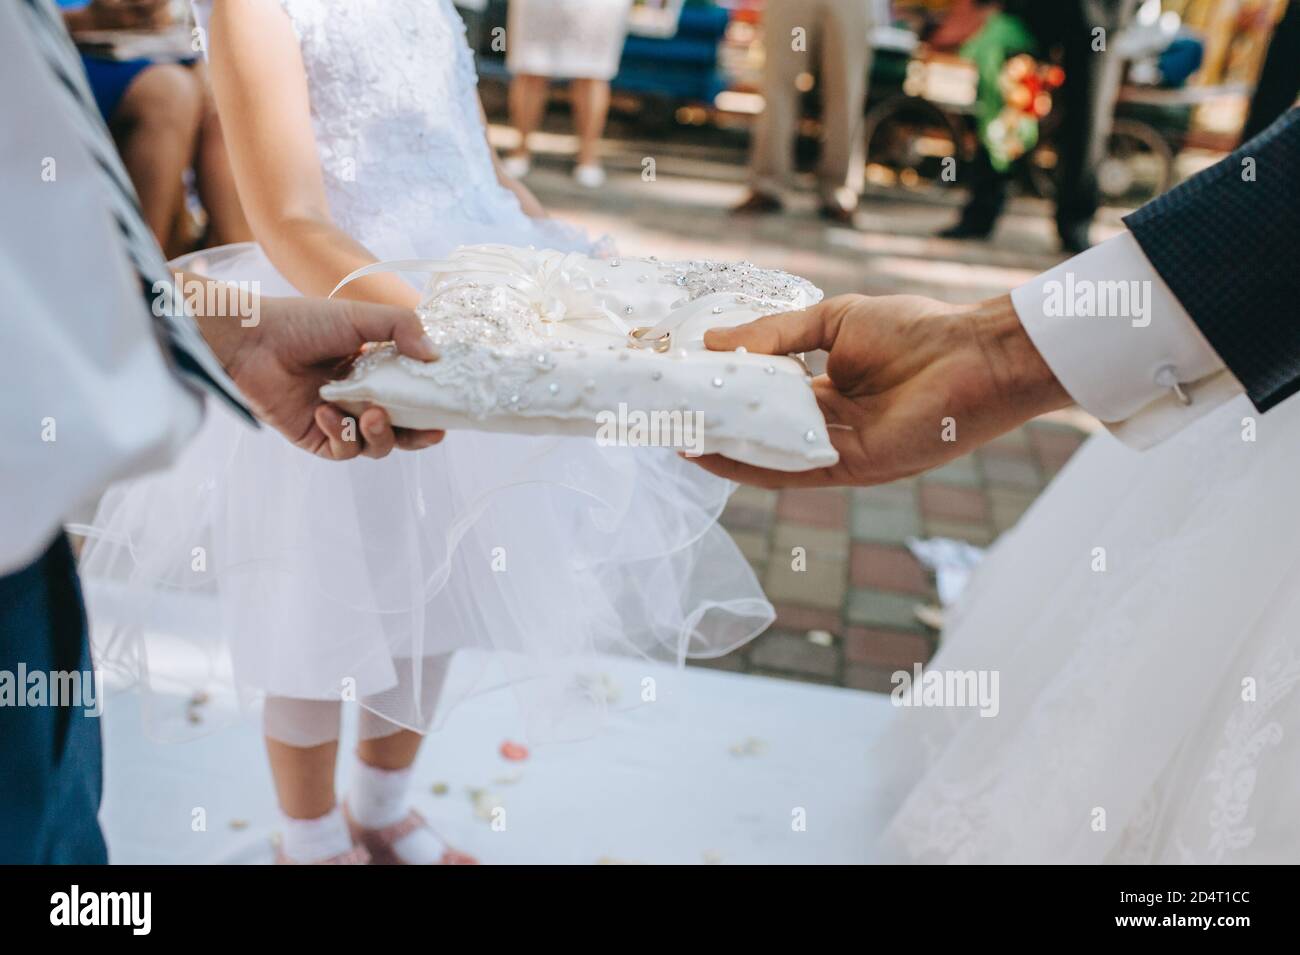 Close up of human hands holding a pillow with wedding rings. Stock Photo